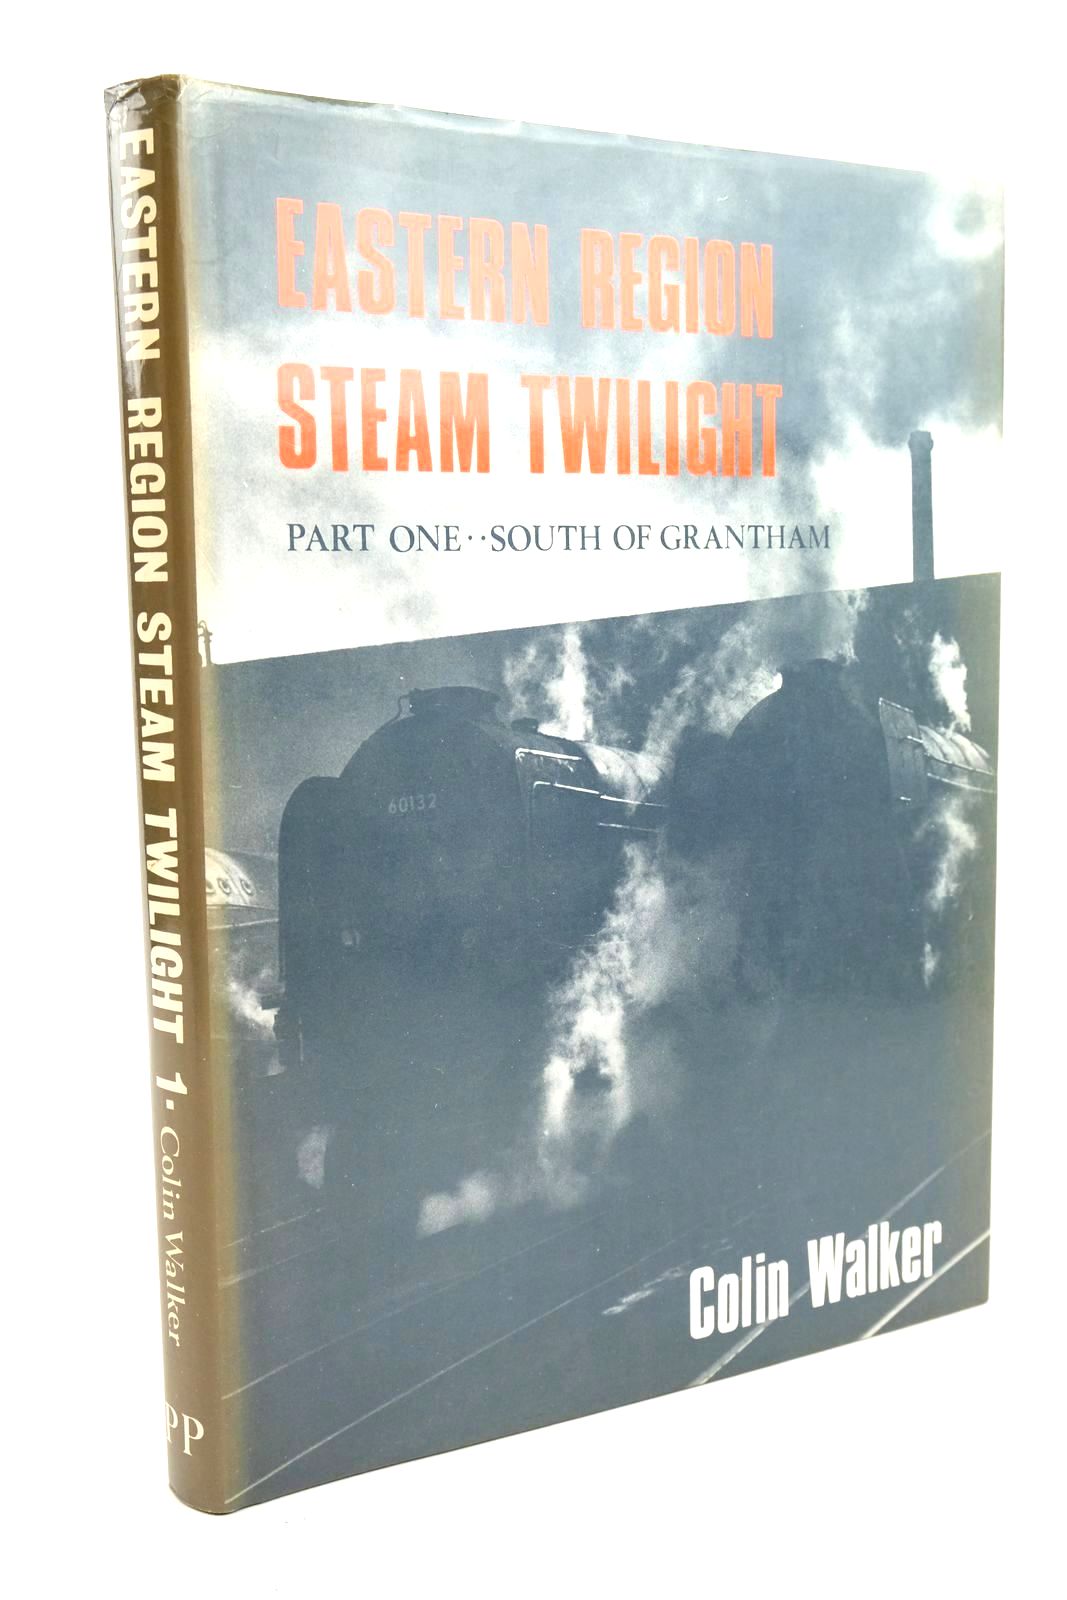 Photo of EASTERN REGION STEAM TWILIGHT PART ONE: SOUTH OF GRANTHAM written by Walker, Colin published by Pendyke Publications (STOCK CODE: 1321080)  for sale by Stella & Rose's Books